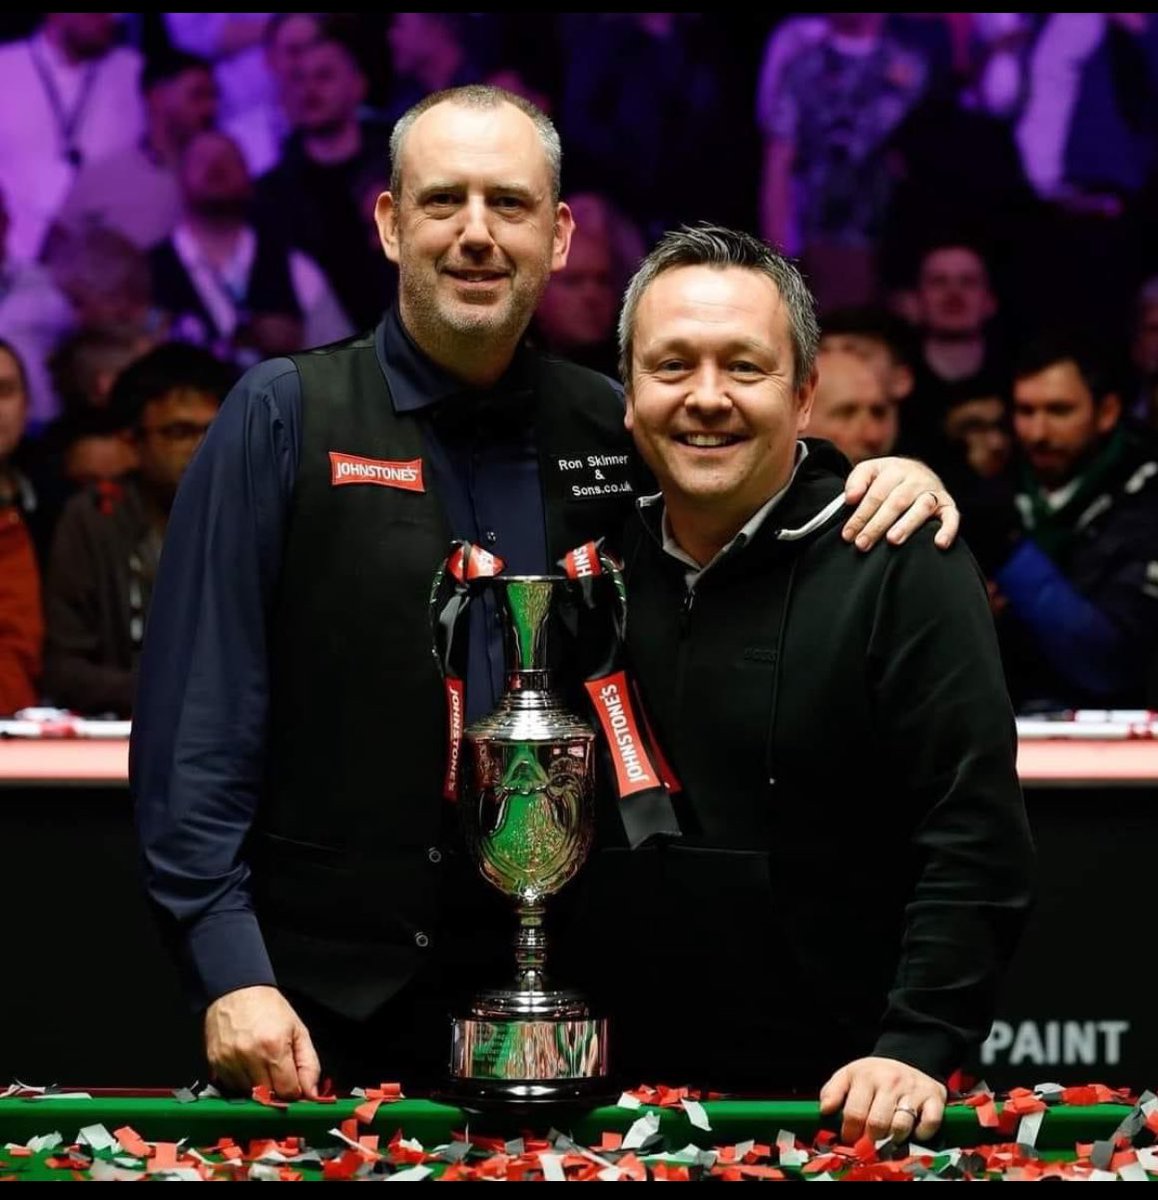 it kills me to say this and i may dekete it before he sees it . but withiut 5 head aka @leewalker147 i may not be olaying as well as i am blah blah blah. without doubt best coach i wirked with by a country mile . #deletebegireheseesthis #fivehead